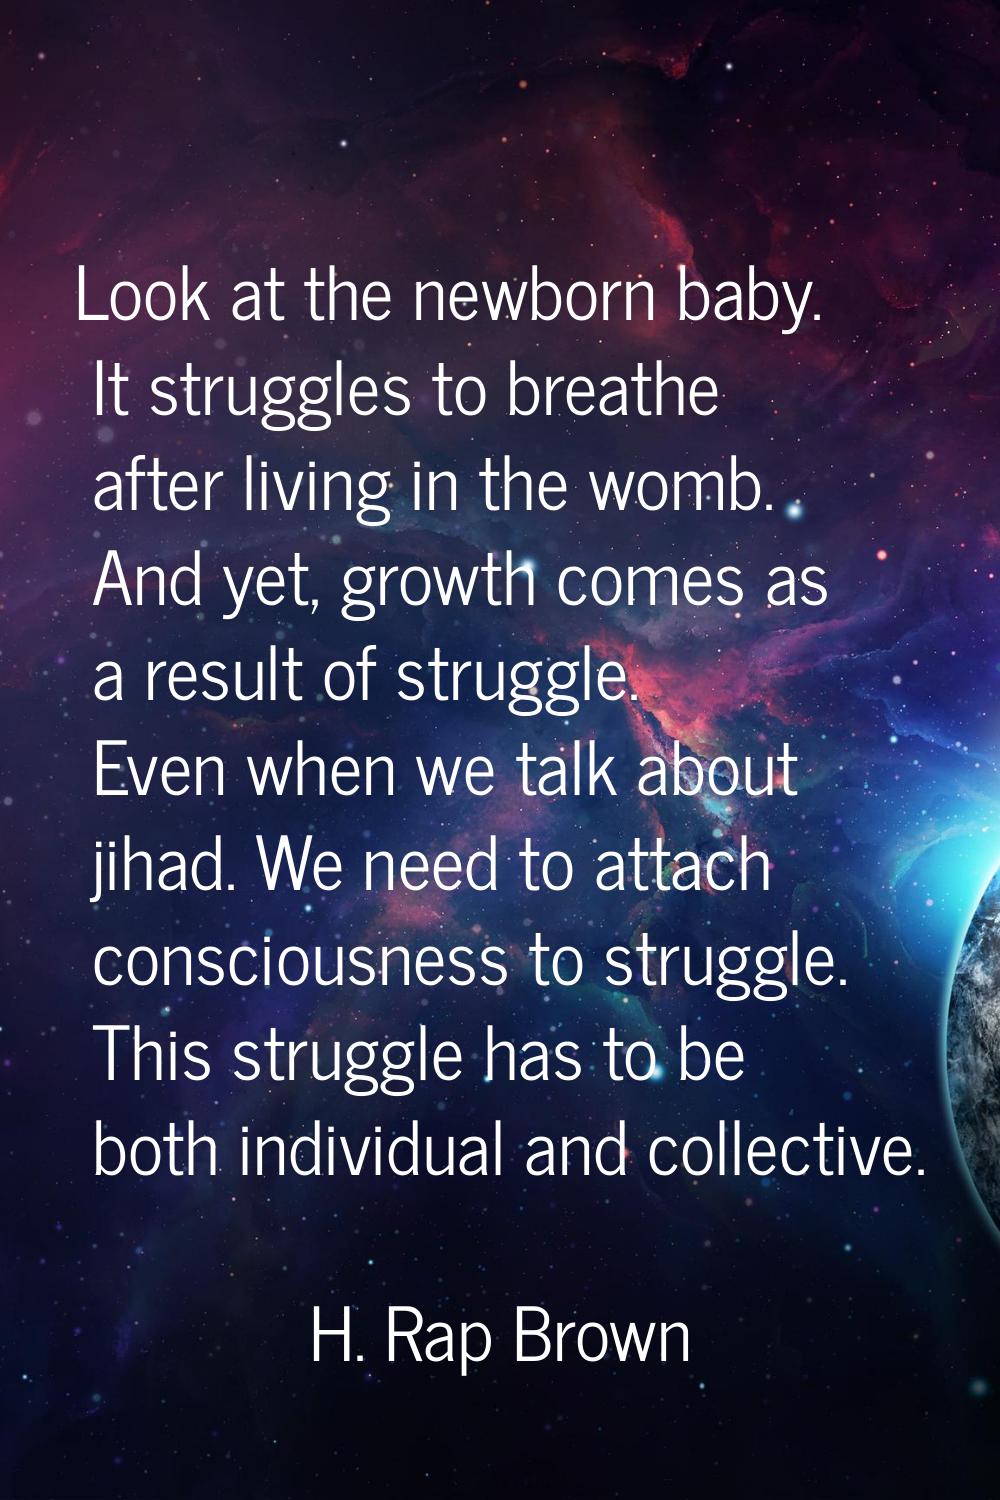 Look at the newborn baby. It struggles to breathe after living in the womb. And yet, growth comes a